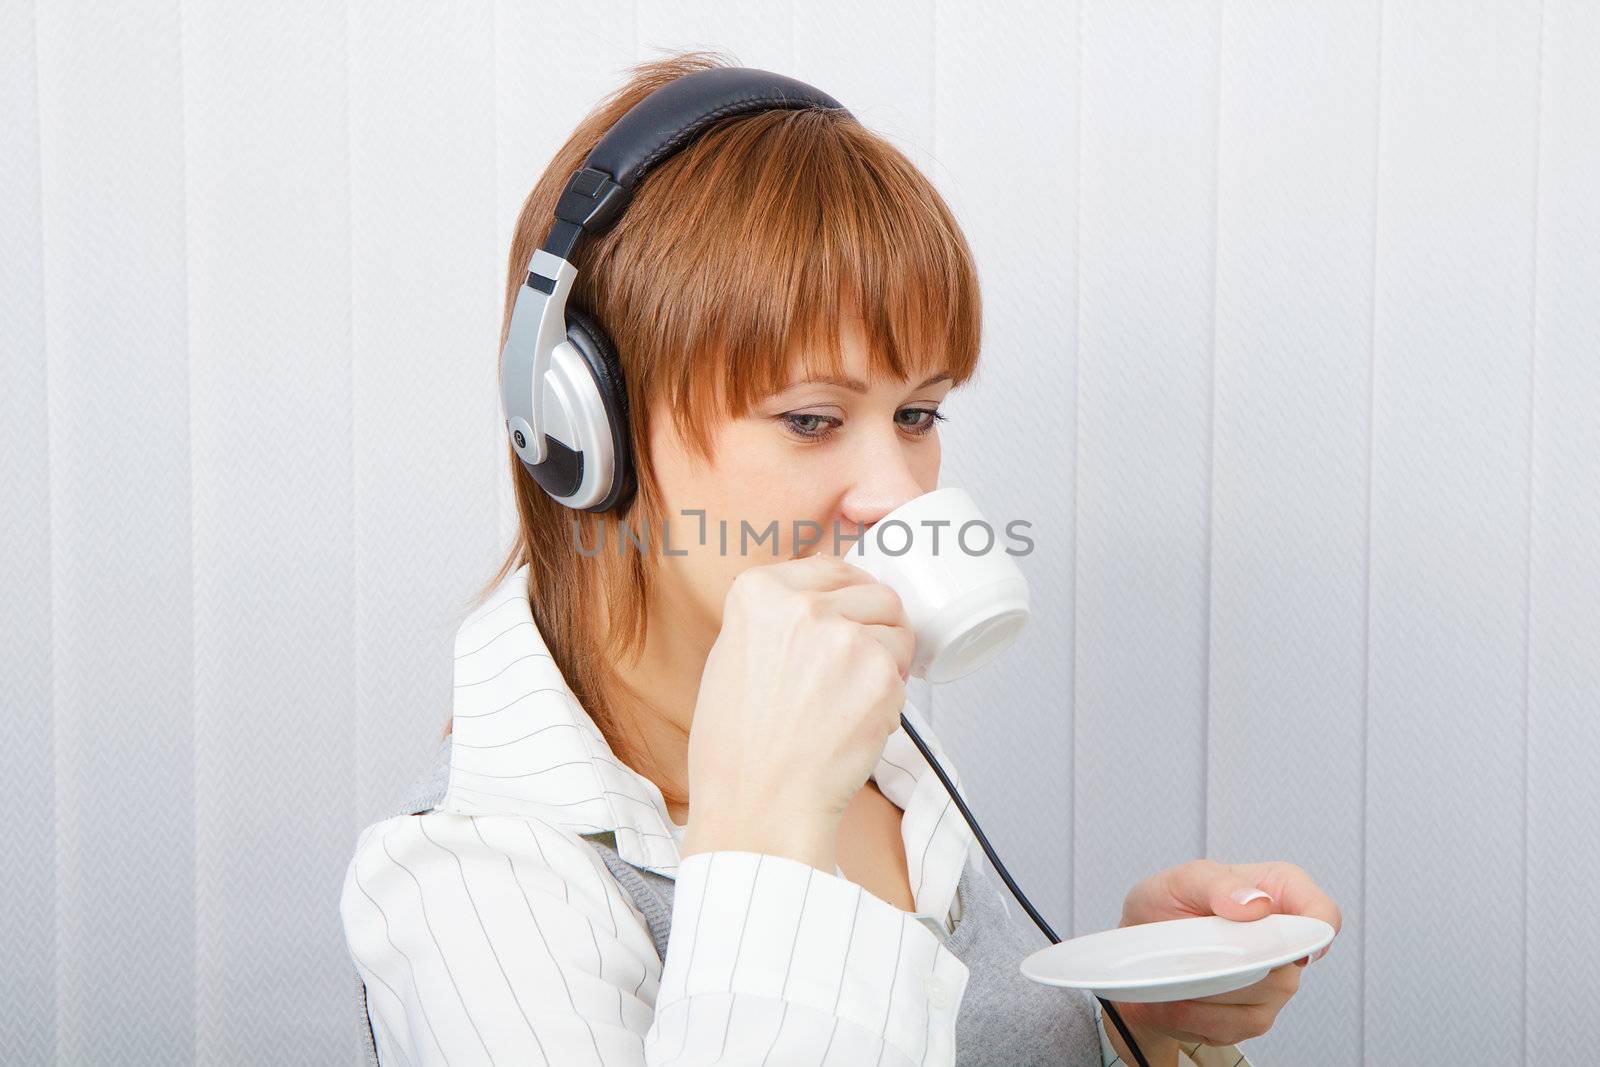 The girl in headphones with a microphone drinks coffee